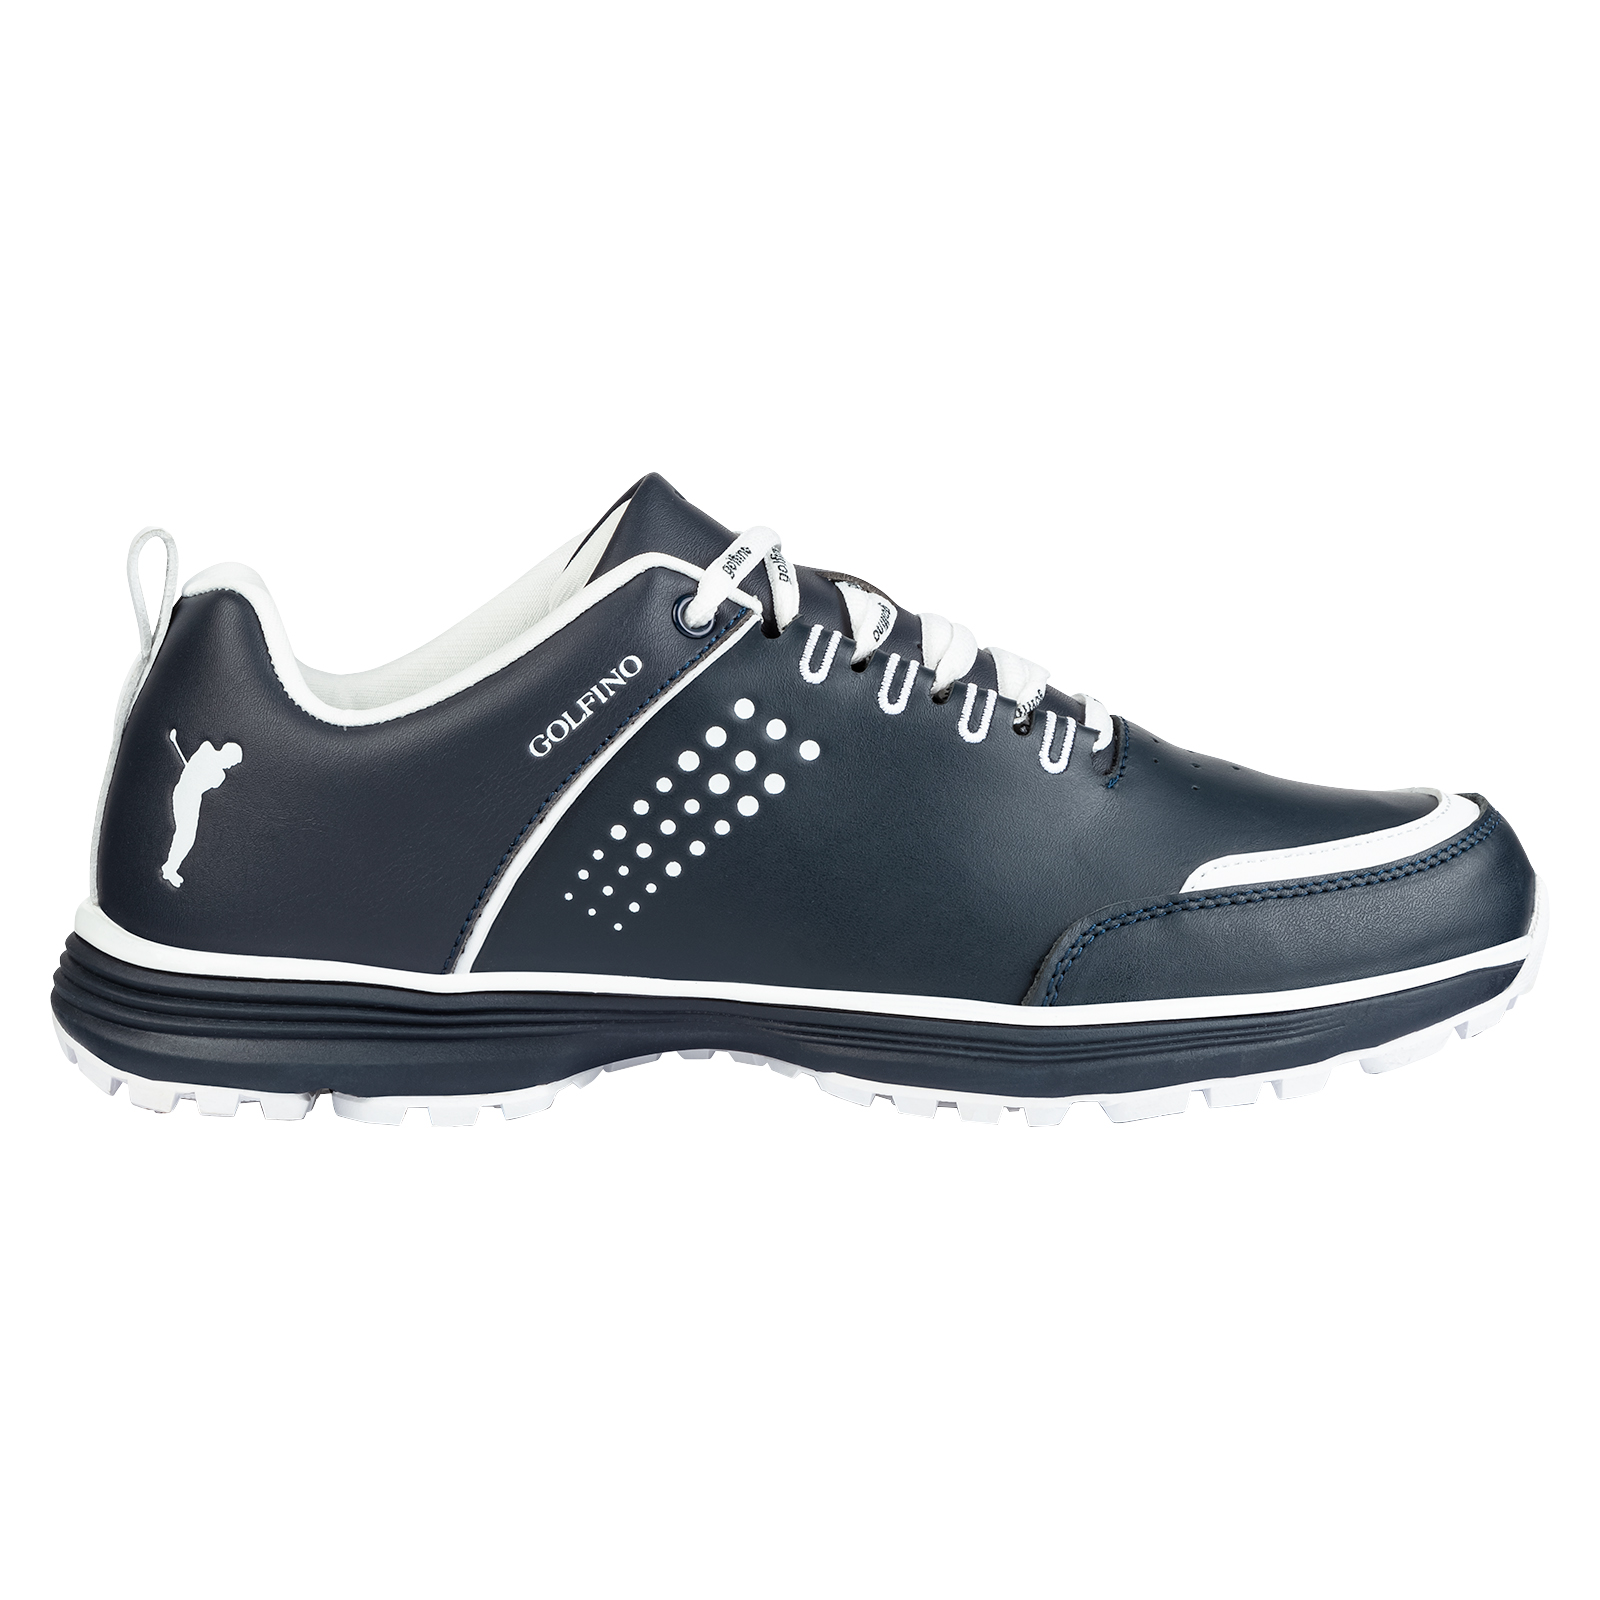 Men's genuine leather golf shoes with spikes in a modern design